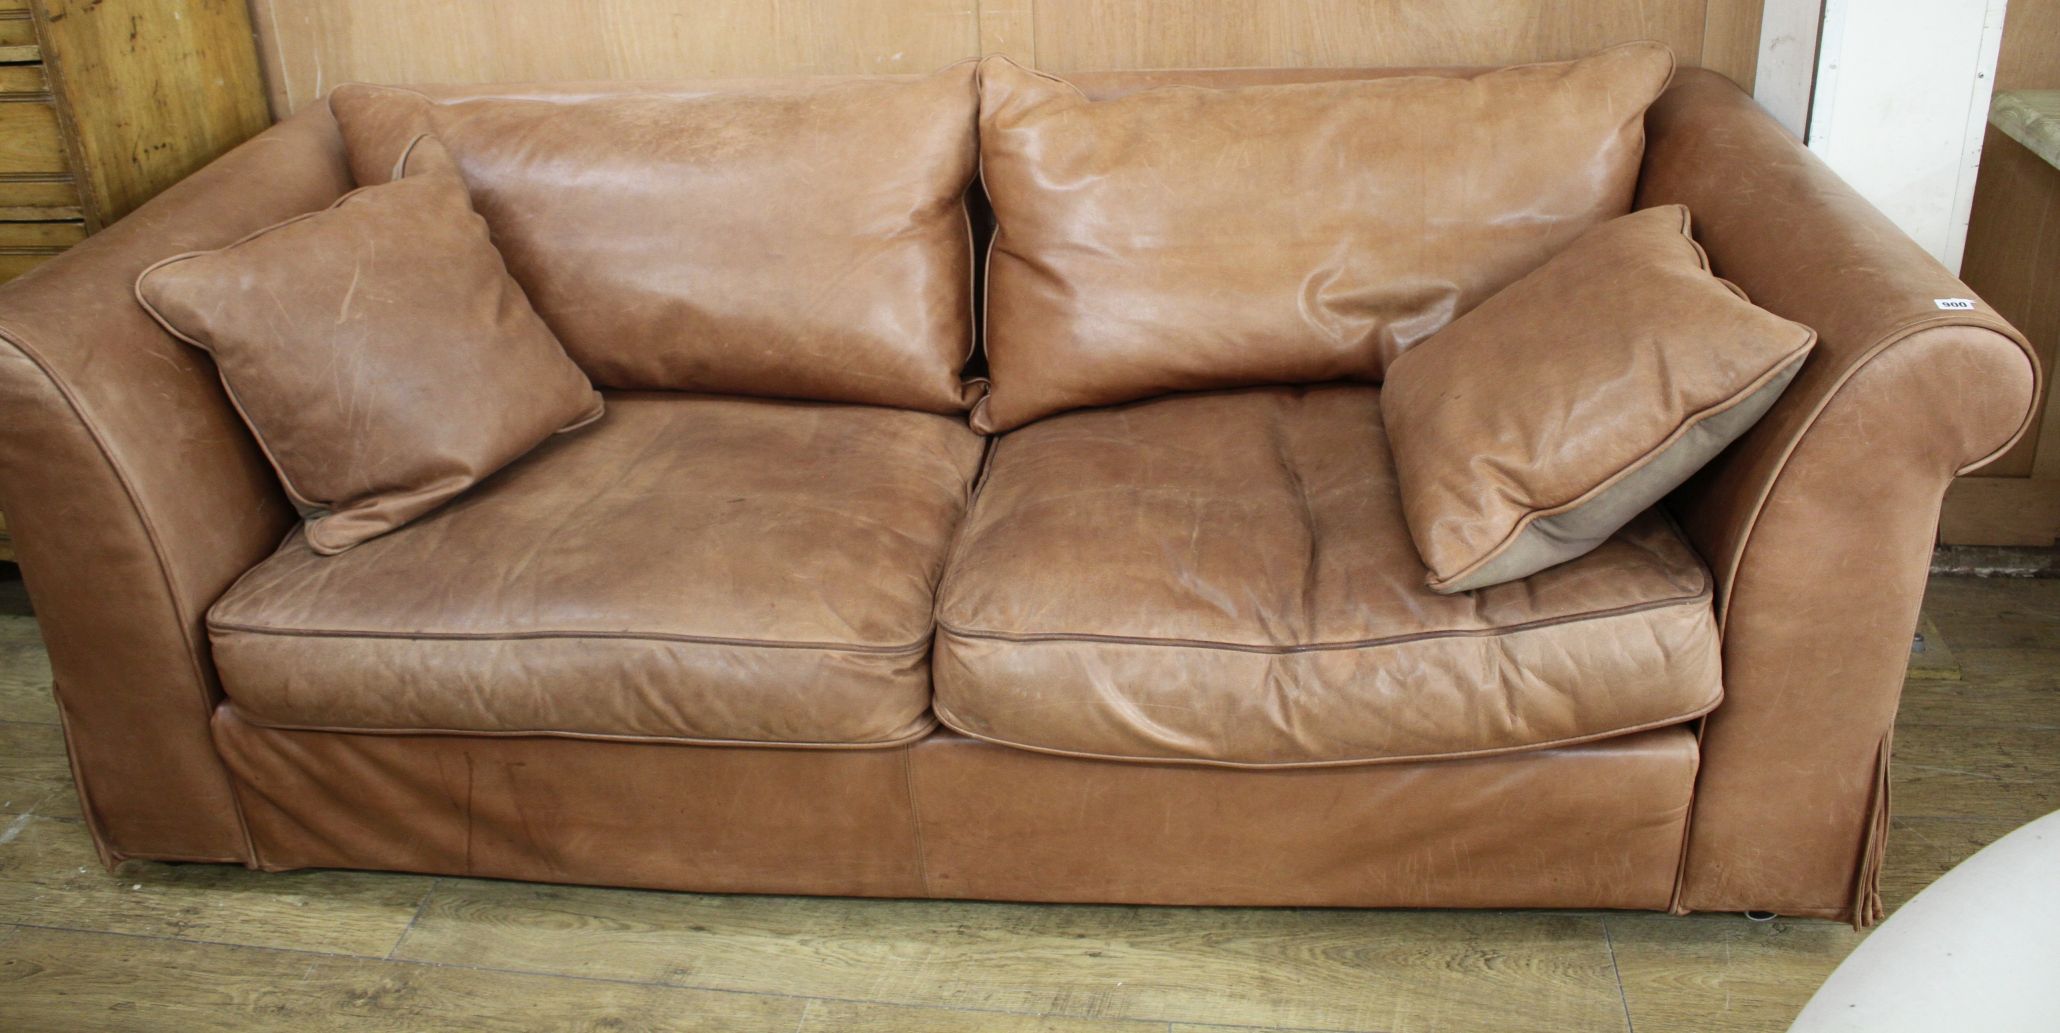 A Heals brown leather sofa, W.220cm D.94cm H.72cmCONDITION: The leather has marks and scratches